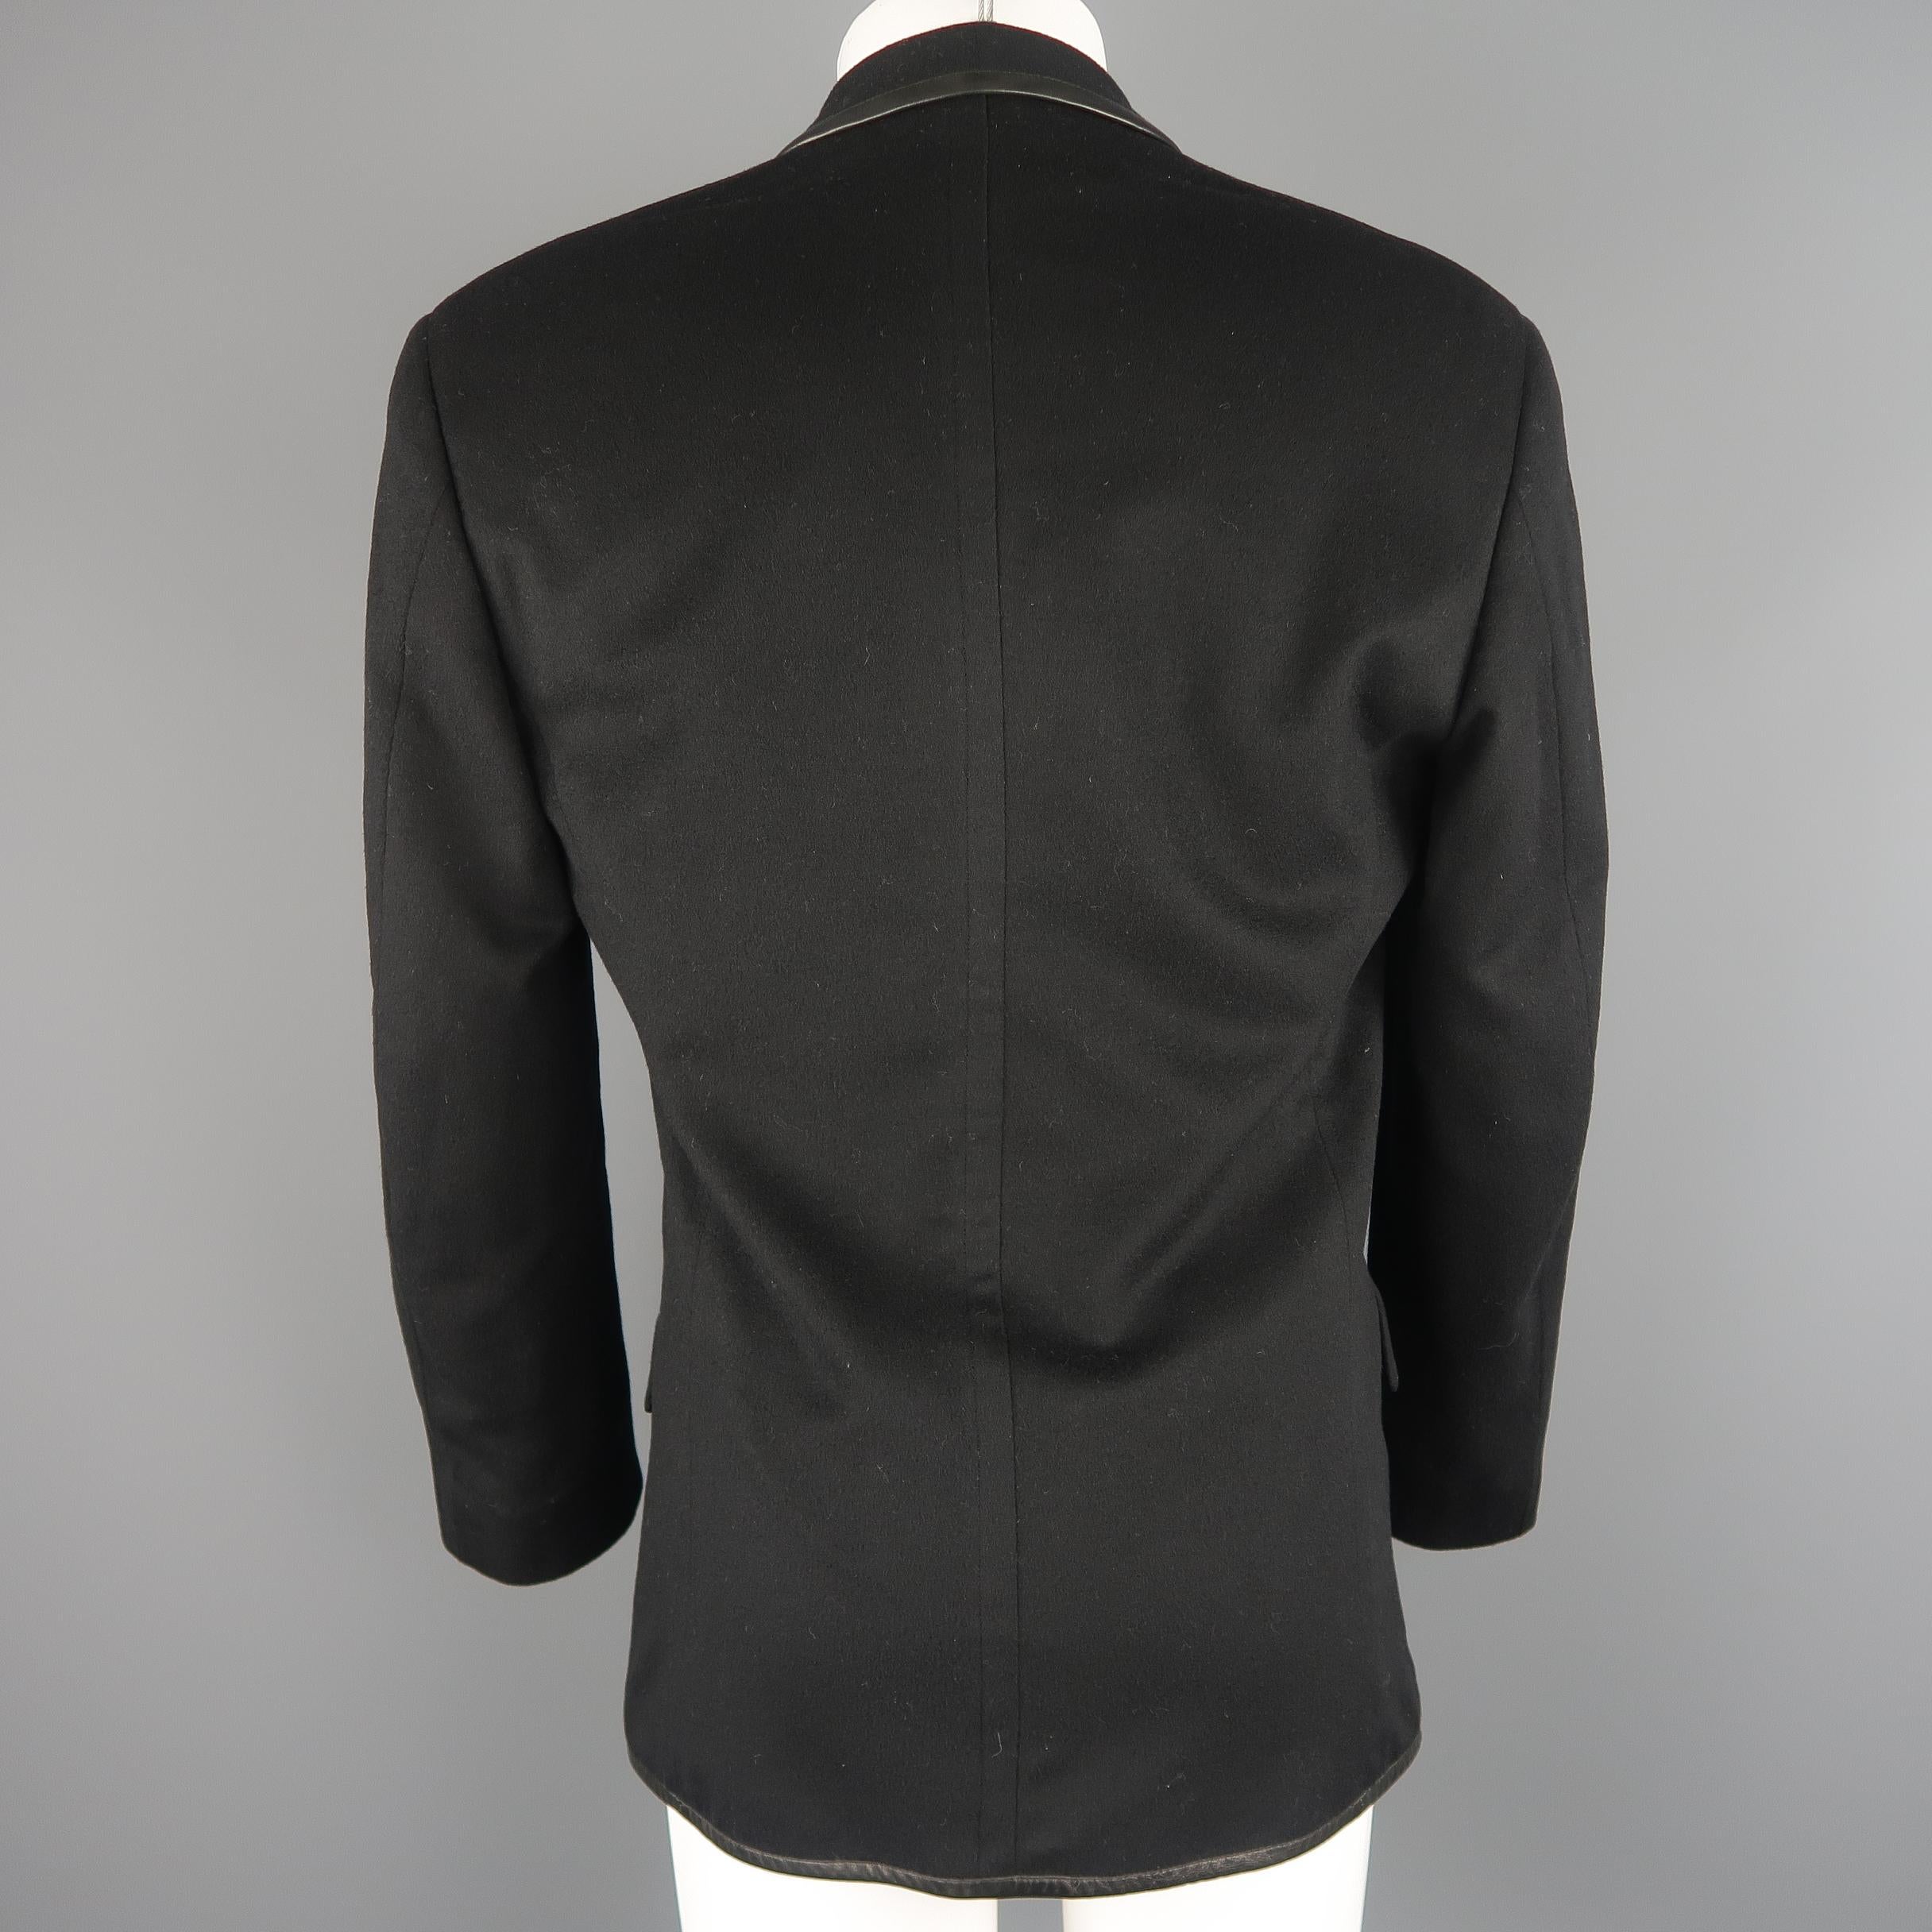 Thierry Mugler Black Wool / Cashmere Leather Trimmed Shawl Collar Sport Coat 2